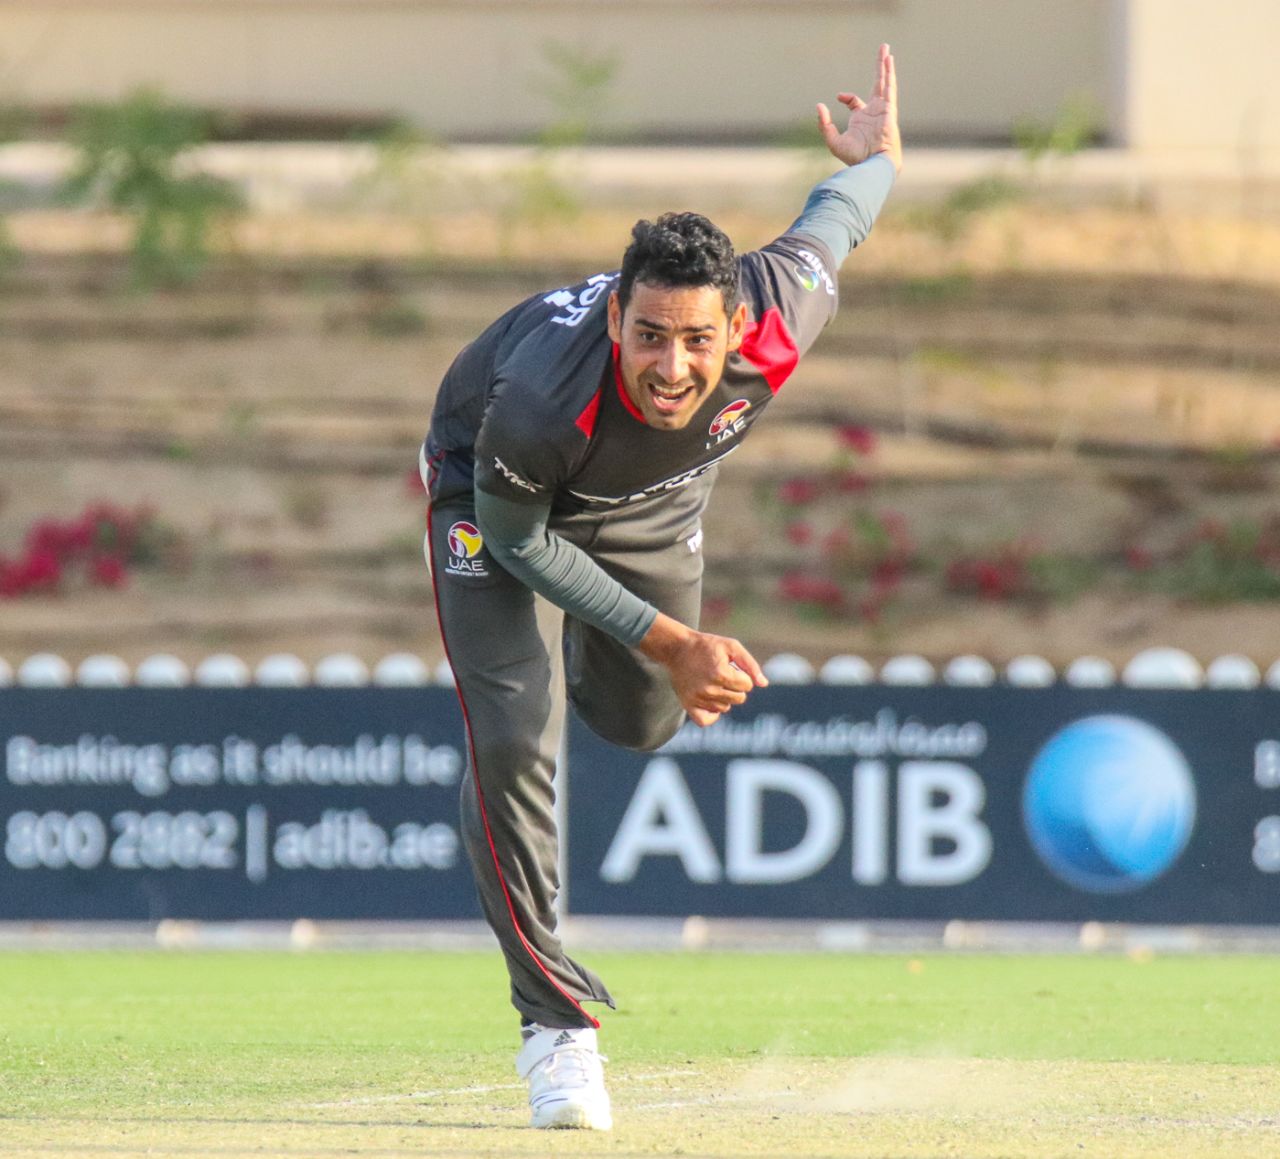 Zahoor Khan sends down a delivery during a late spell, UAE v USA, 2nd T20I, Dubai, March 16, 2019